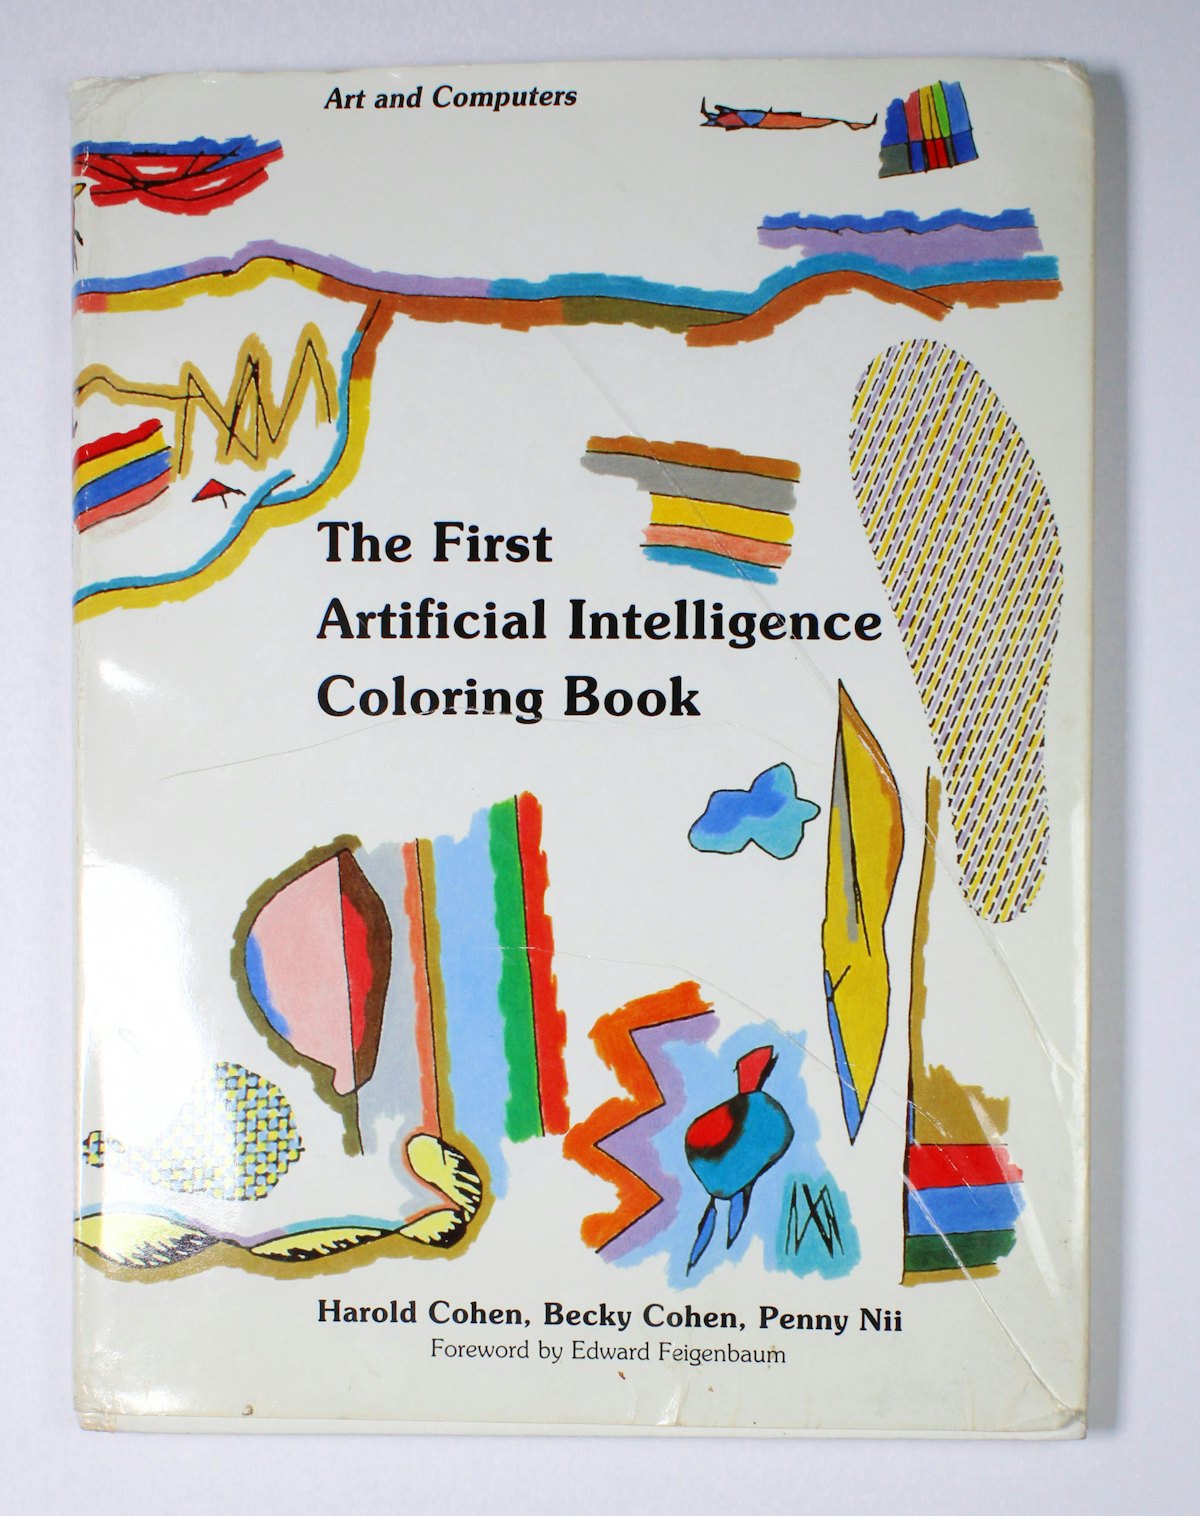 The First Artificial Intelligence Coloring Book